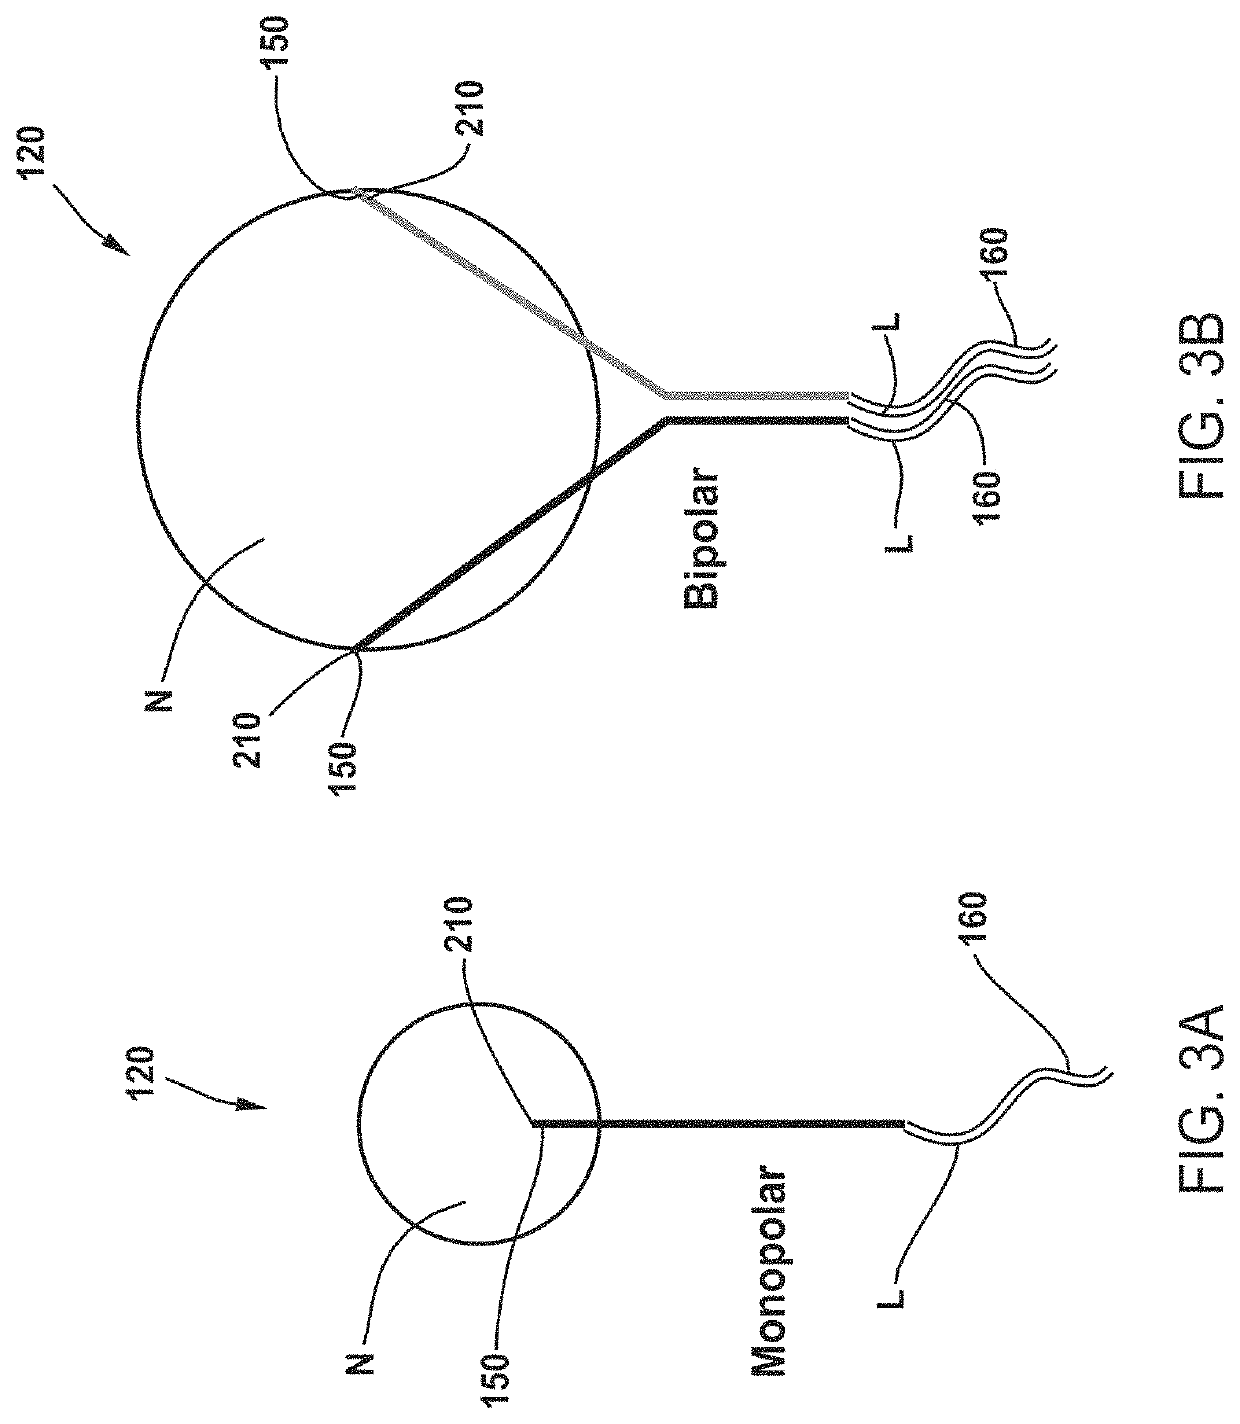 Device and method to selectively and reversibly modulate a nervous system structure to inhibit the perception of pain